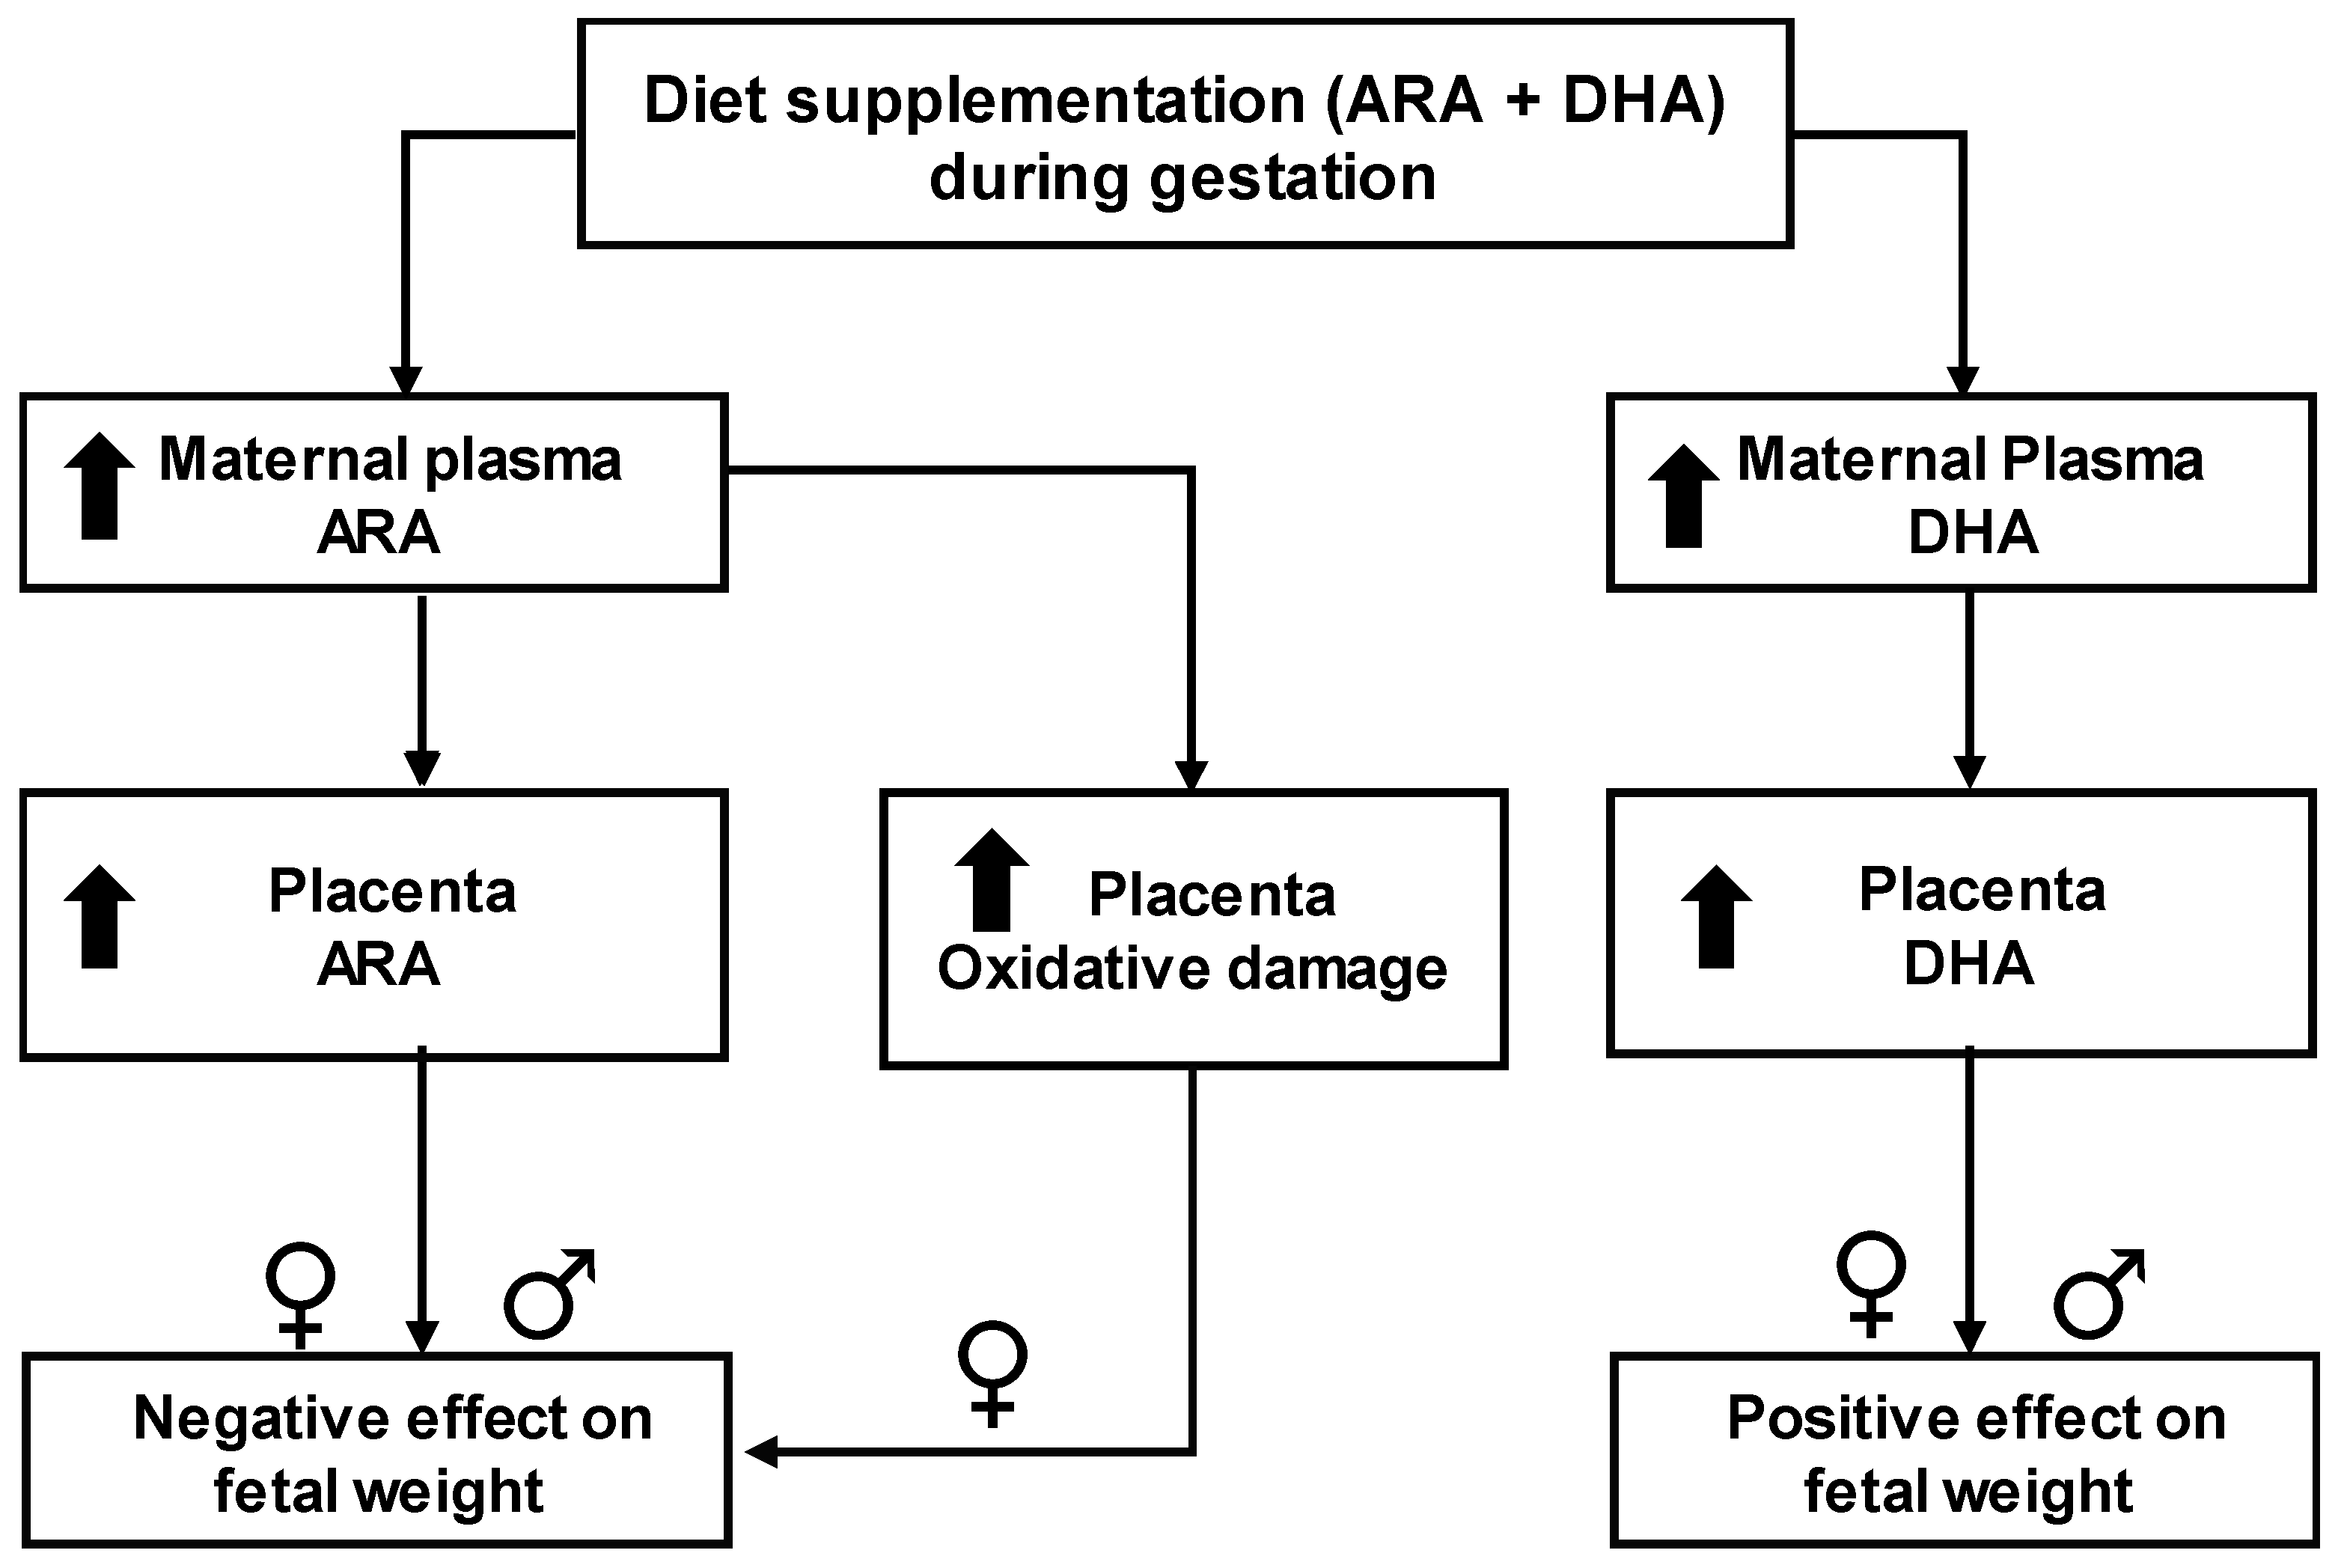 Effects of Arachidonic and Docosohexahenoic Acid Supplementation during Gestation in Rats. Implication of Placental Oxidative Stress